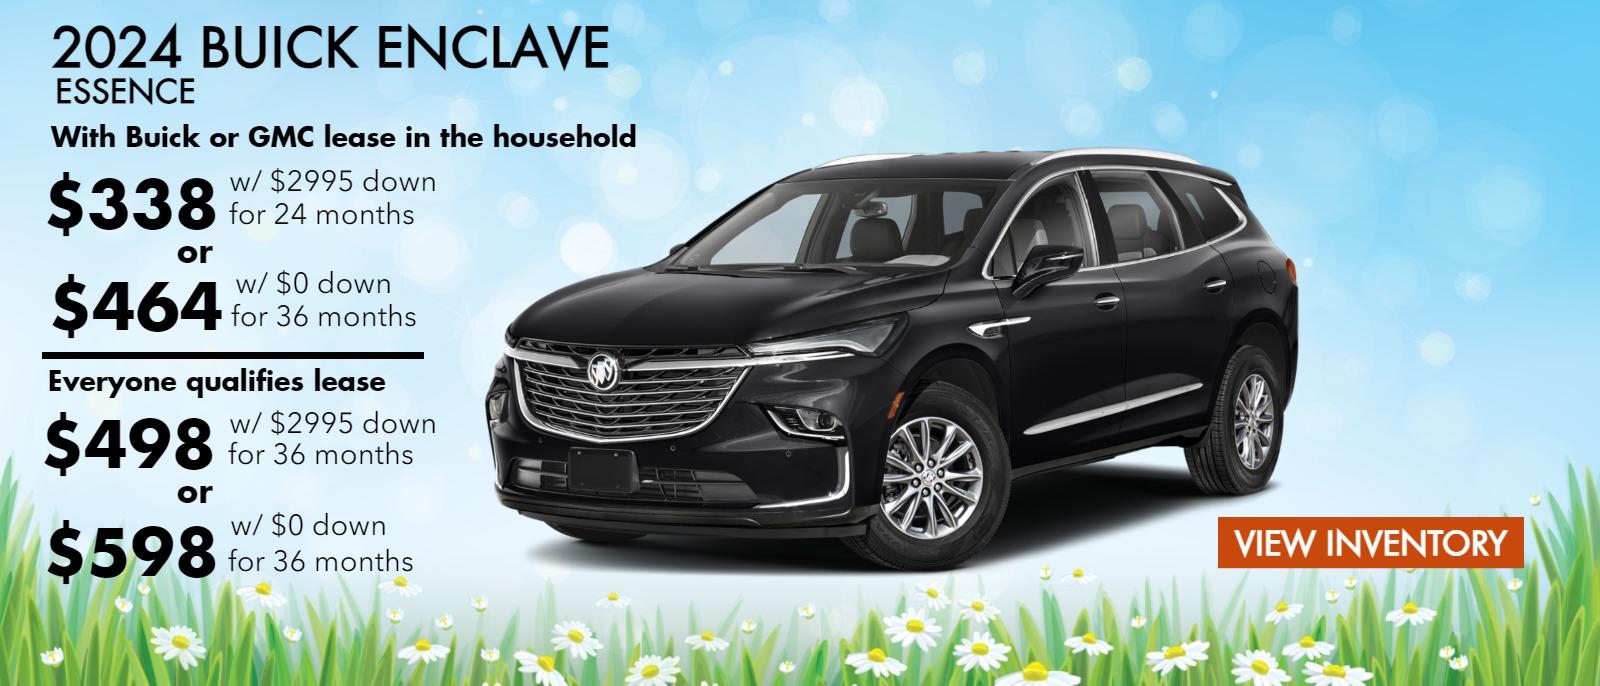 2024 Buick Enclave Essence - With Buick or GMC lease in the household $338 w/ $2995 for 24 months or $464 with $0 down for 36 months. Everyone qualifies lease $498 w/ $2995 for 36 months or $598 with $0 down for 36 months.